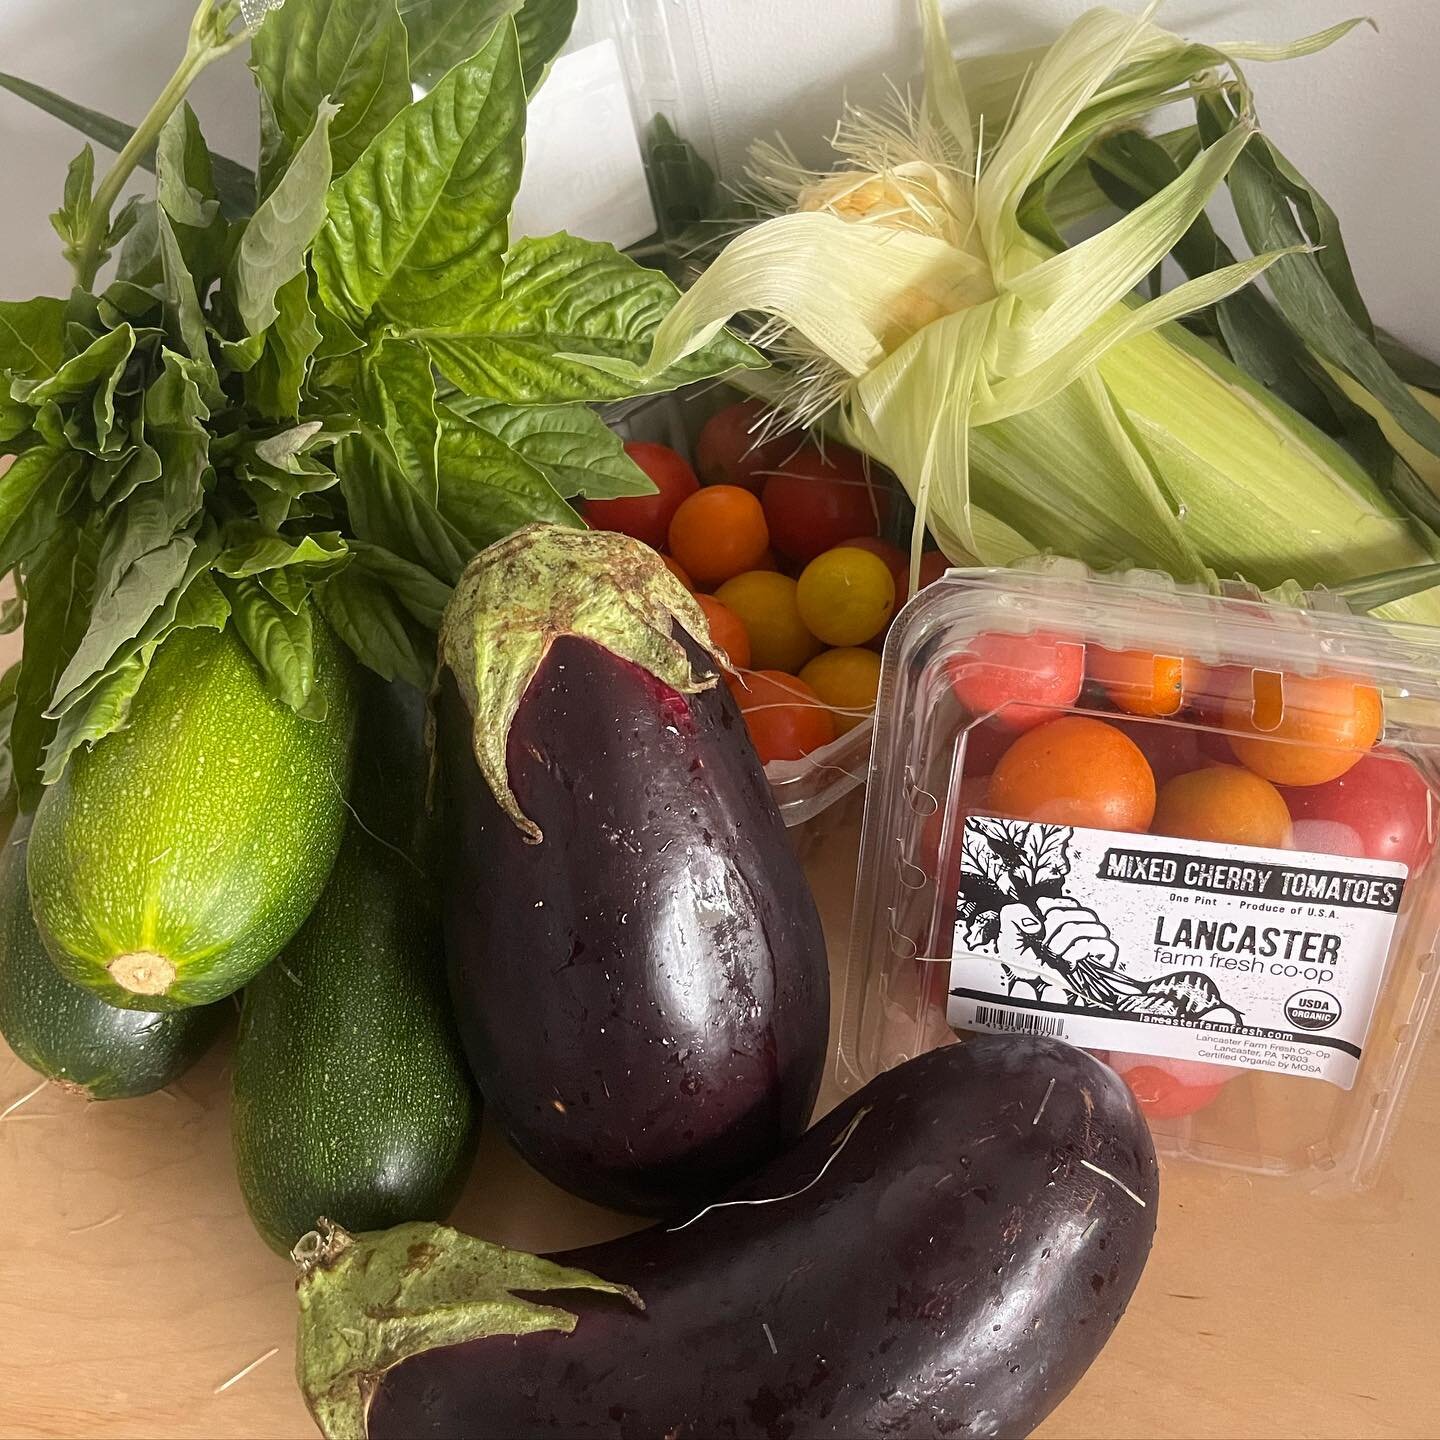 41 boxes of friendly CSA went out yesterday!
We are excited for our friends inside to be able to try all of summers bounty. Cucumbers zucchini corn cherry tomatoes fresh basil eggplant and some special options such as rice and olives!
🫒 🌽 🍆 🍅 🥒 